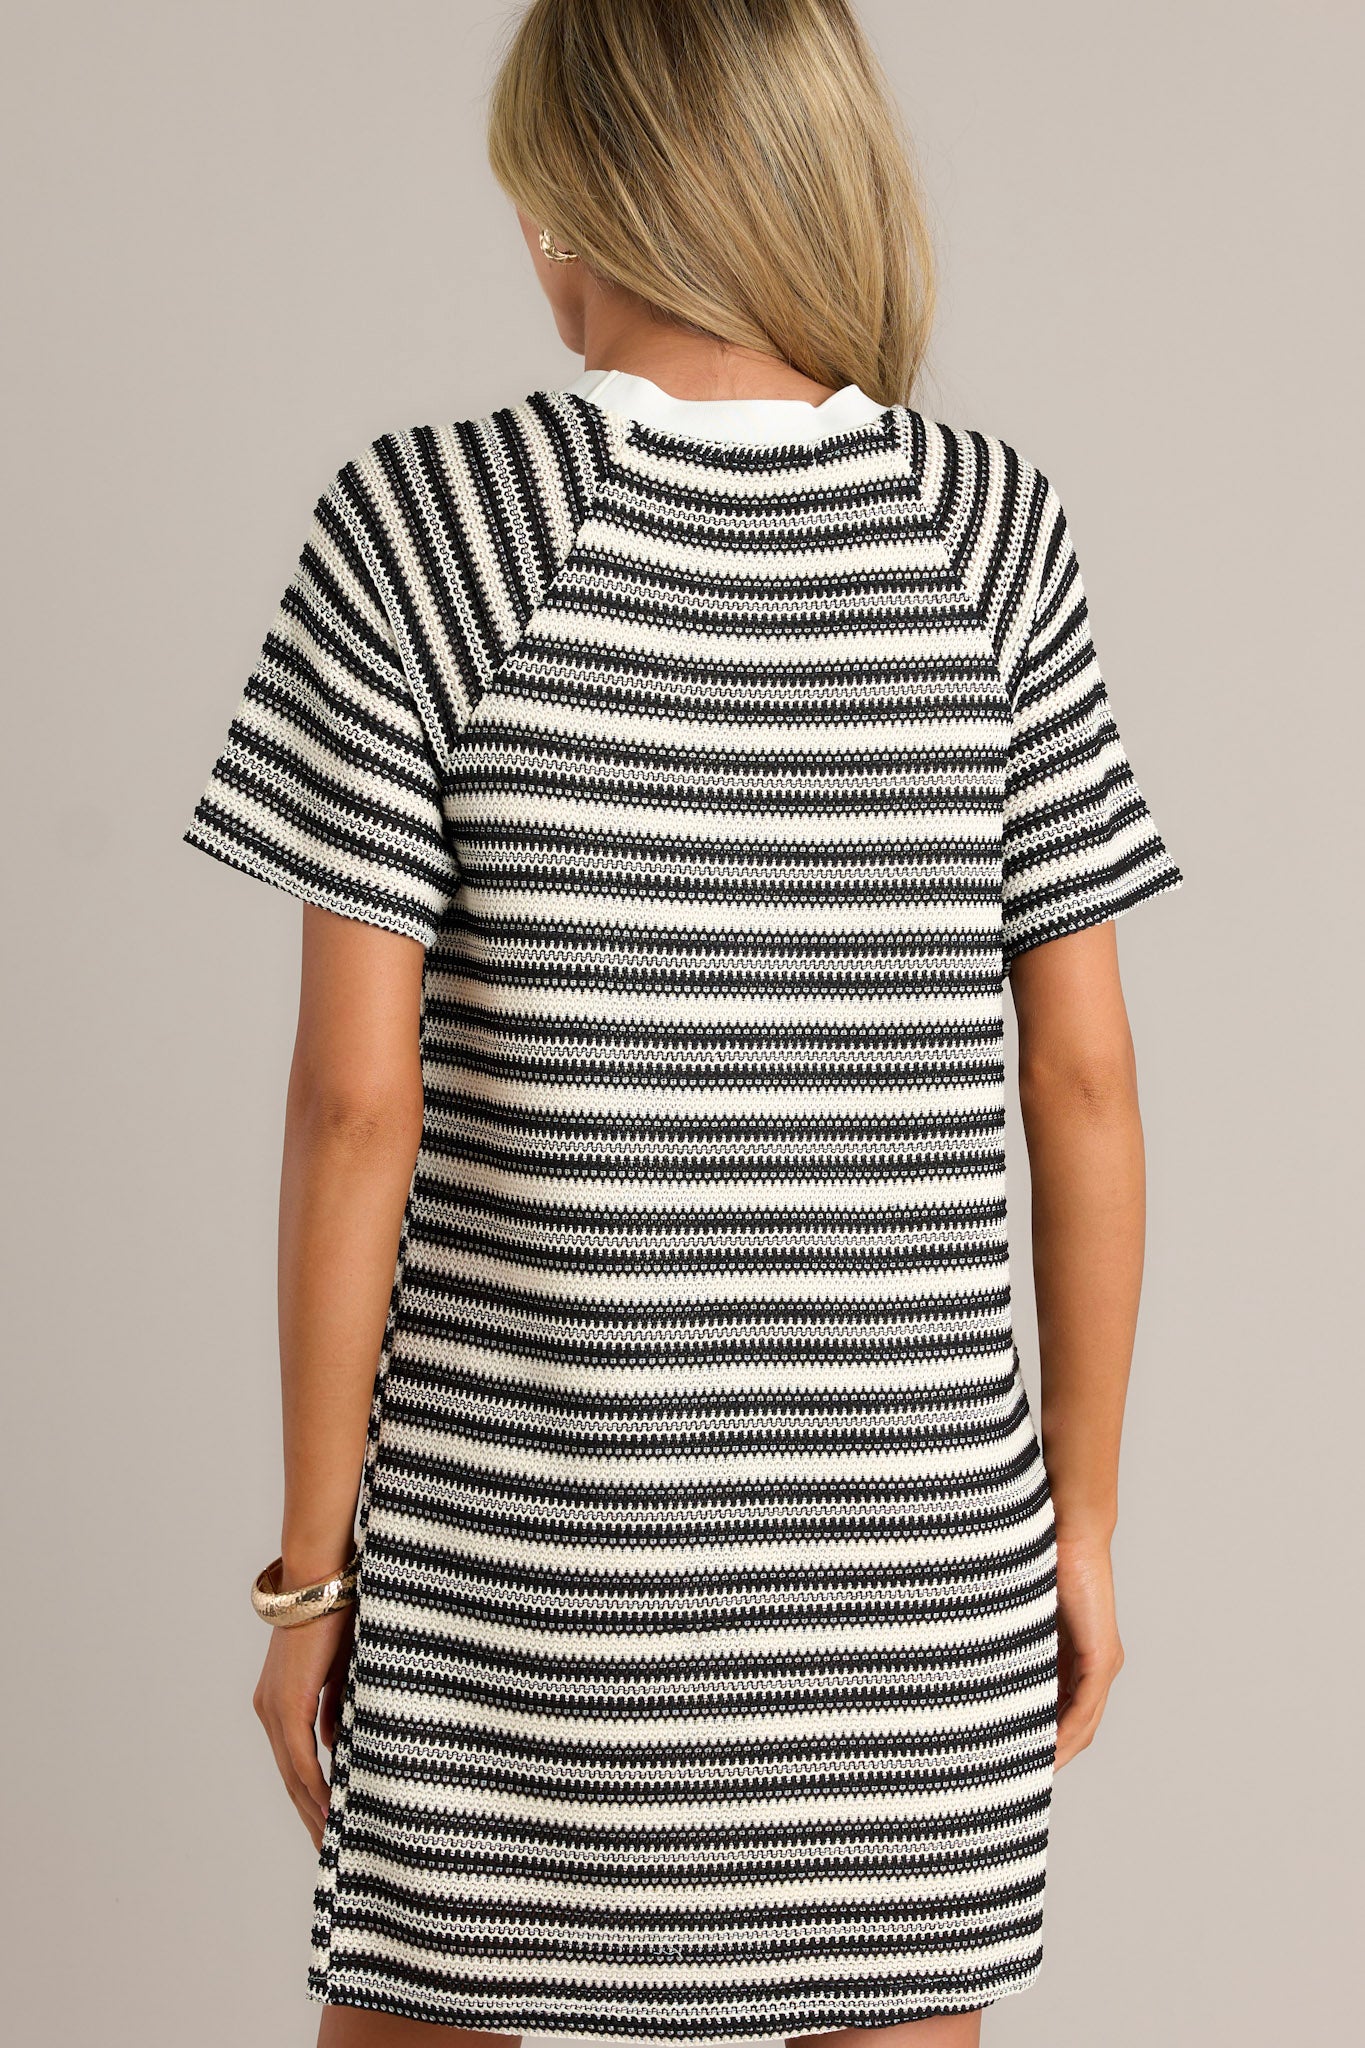 Back view of a black stripe mini dress highlighting the horizontal stripe design, relaxed fit, and overall fit.